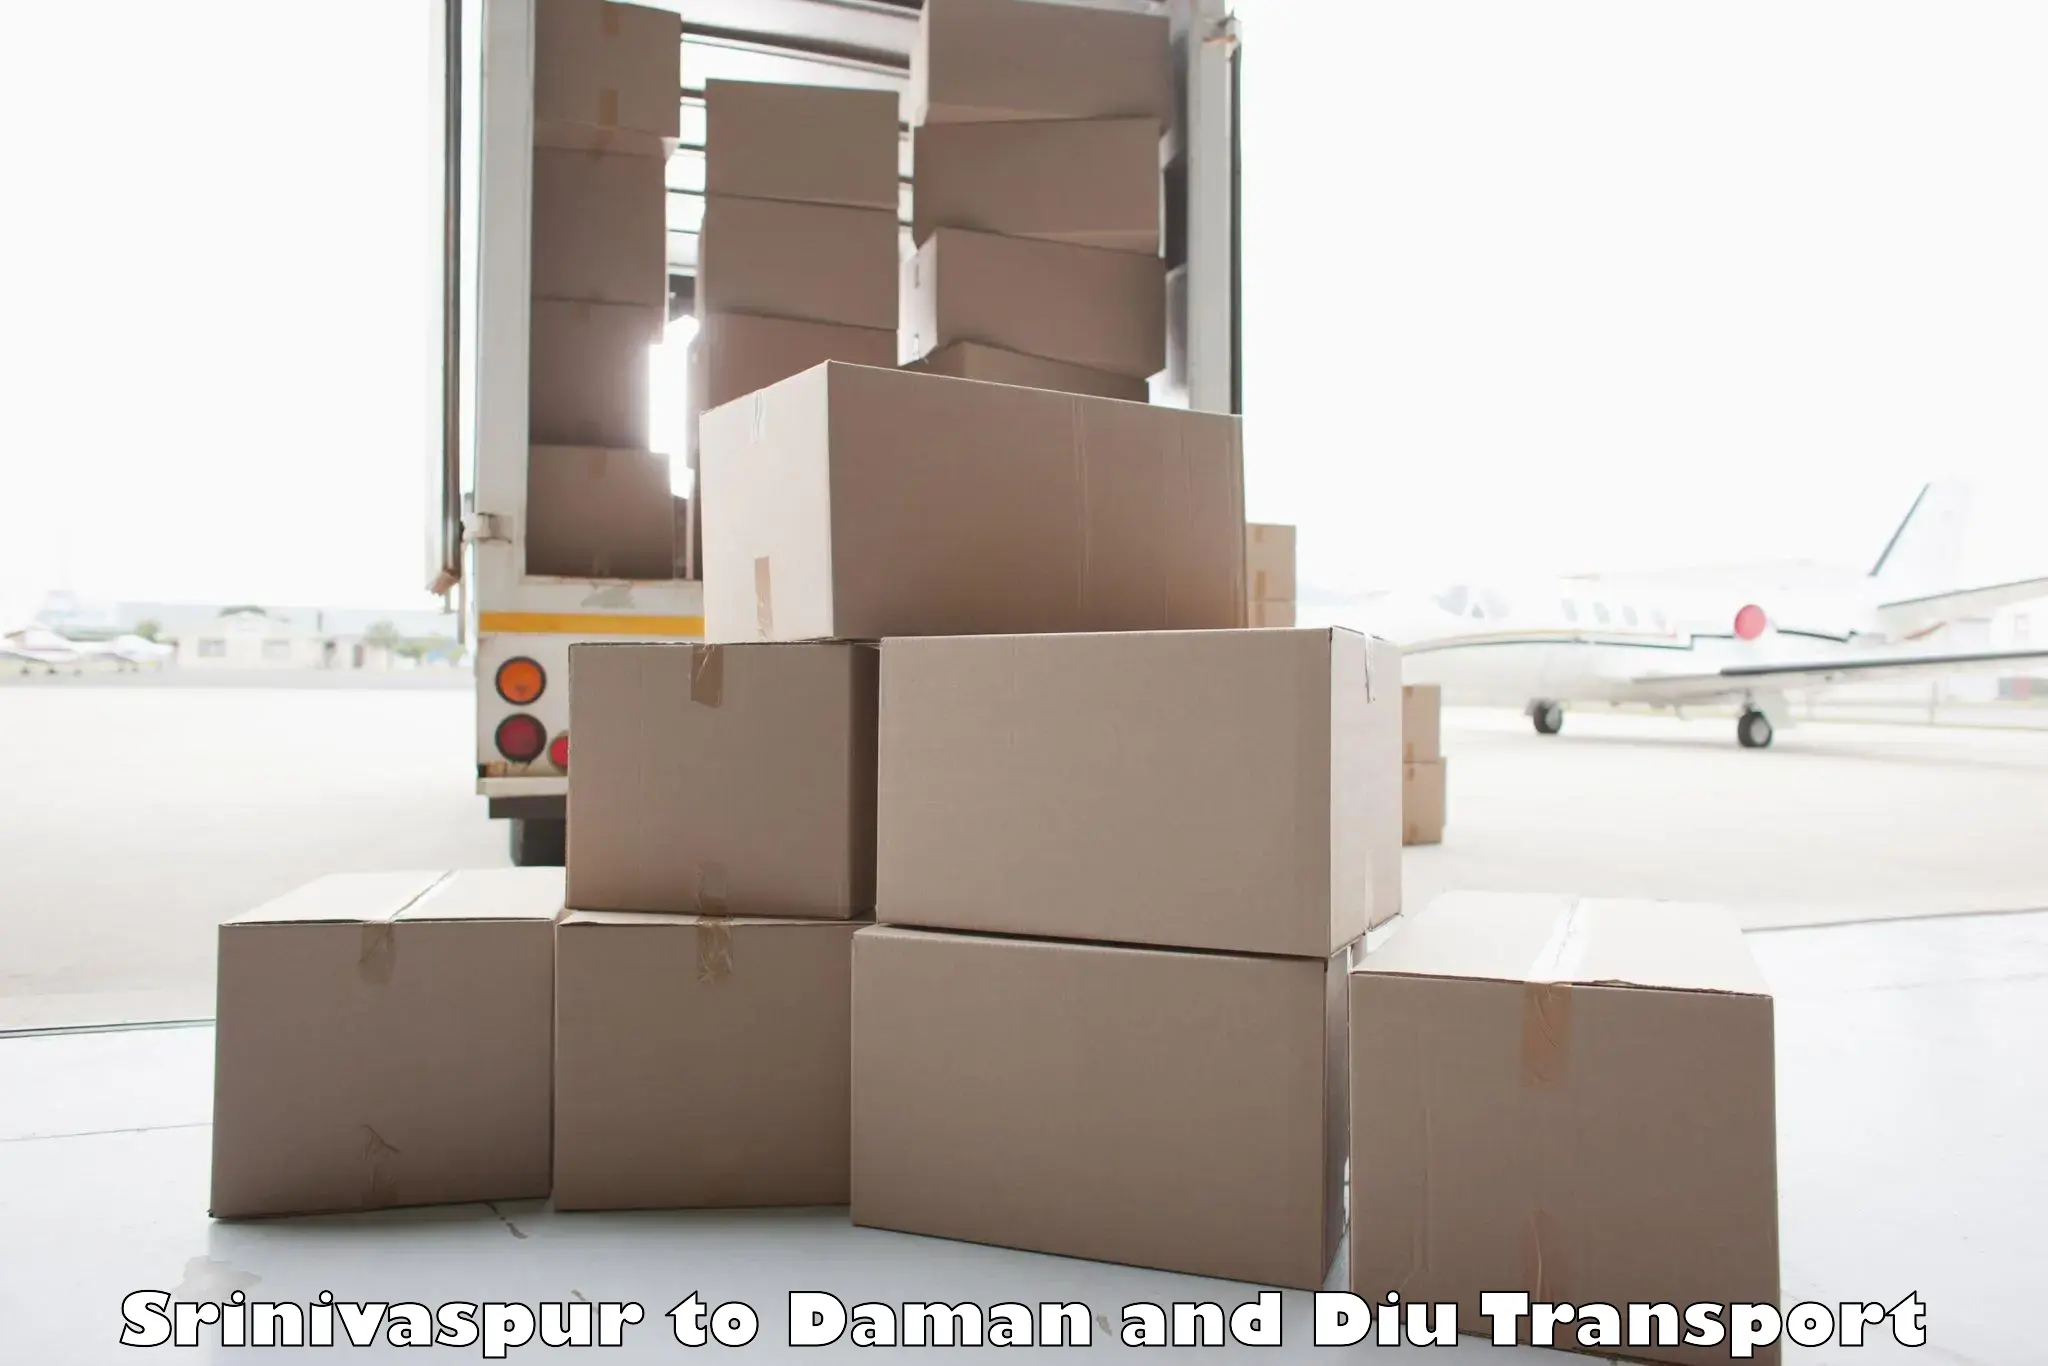 Parcel transport services in Srinivaspur to Daman and Diu